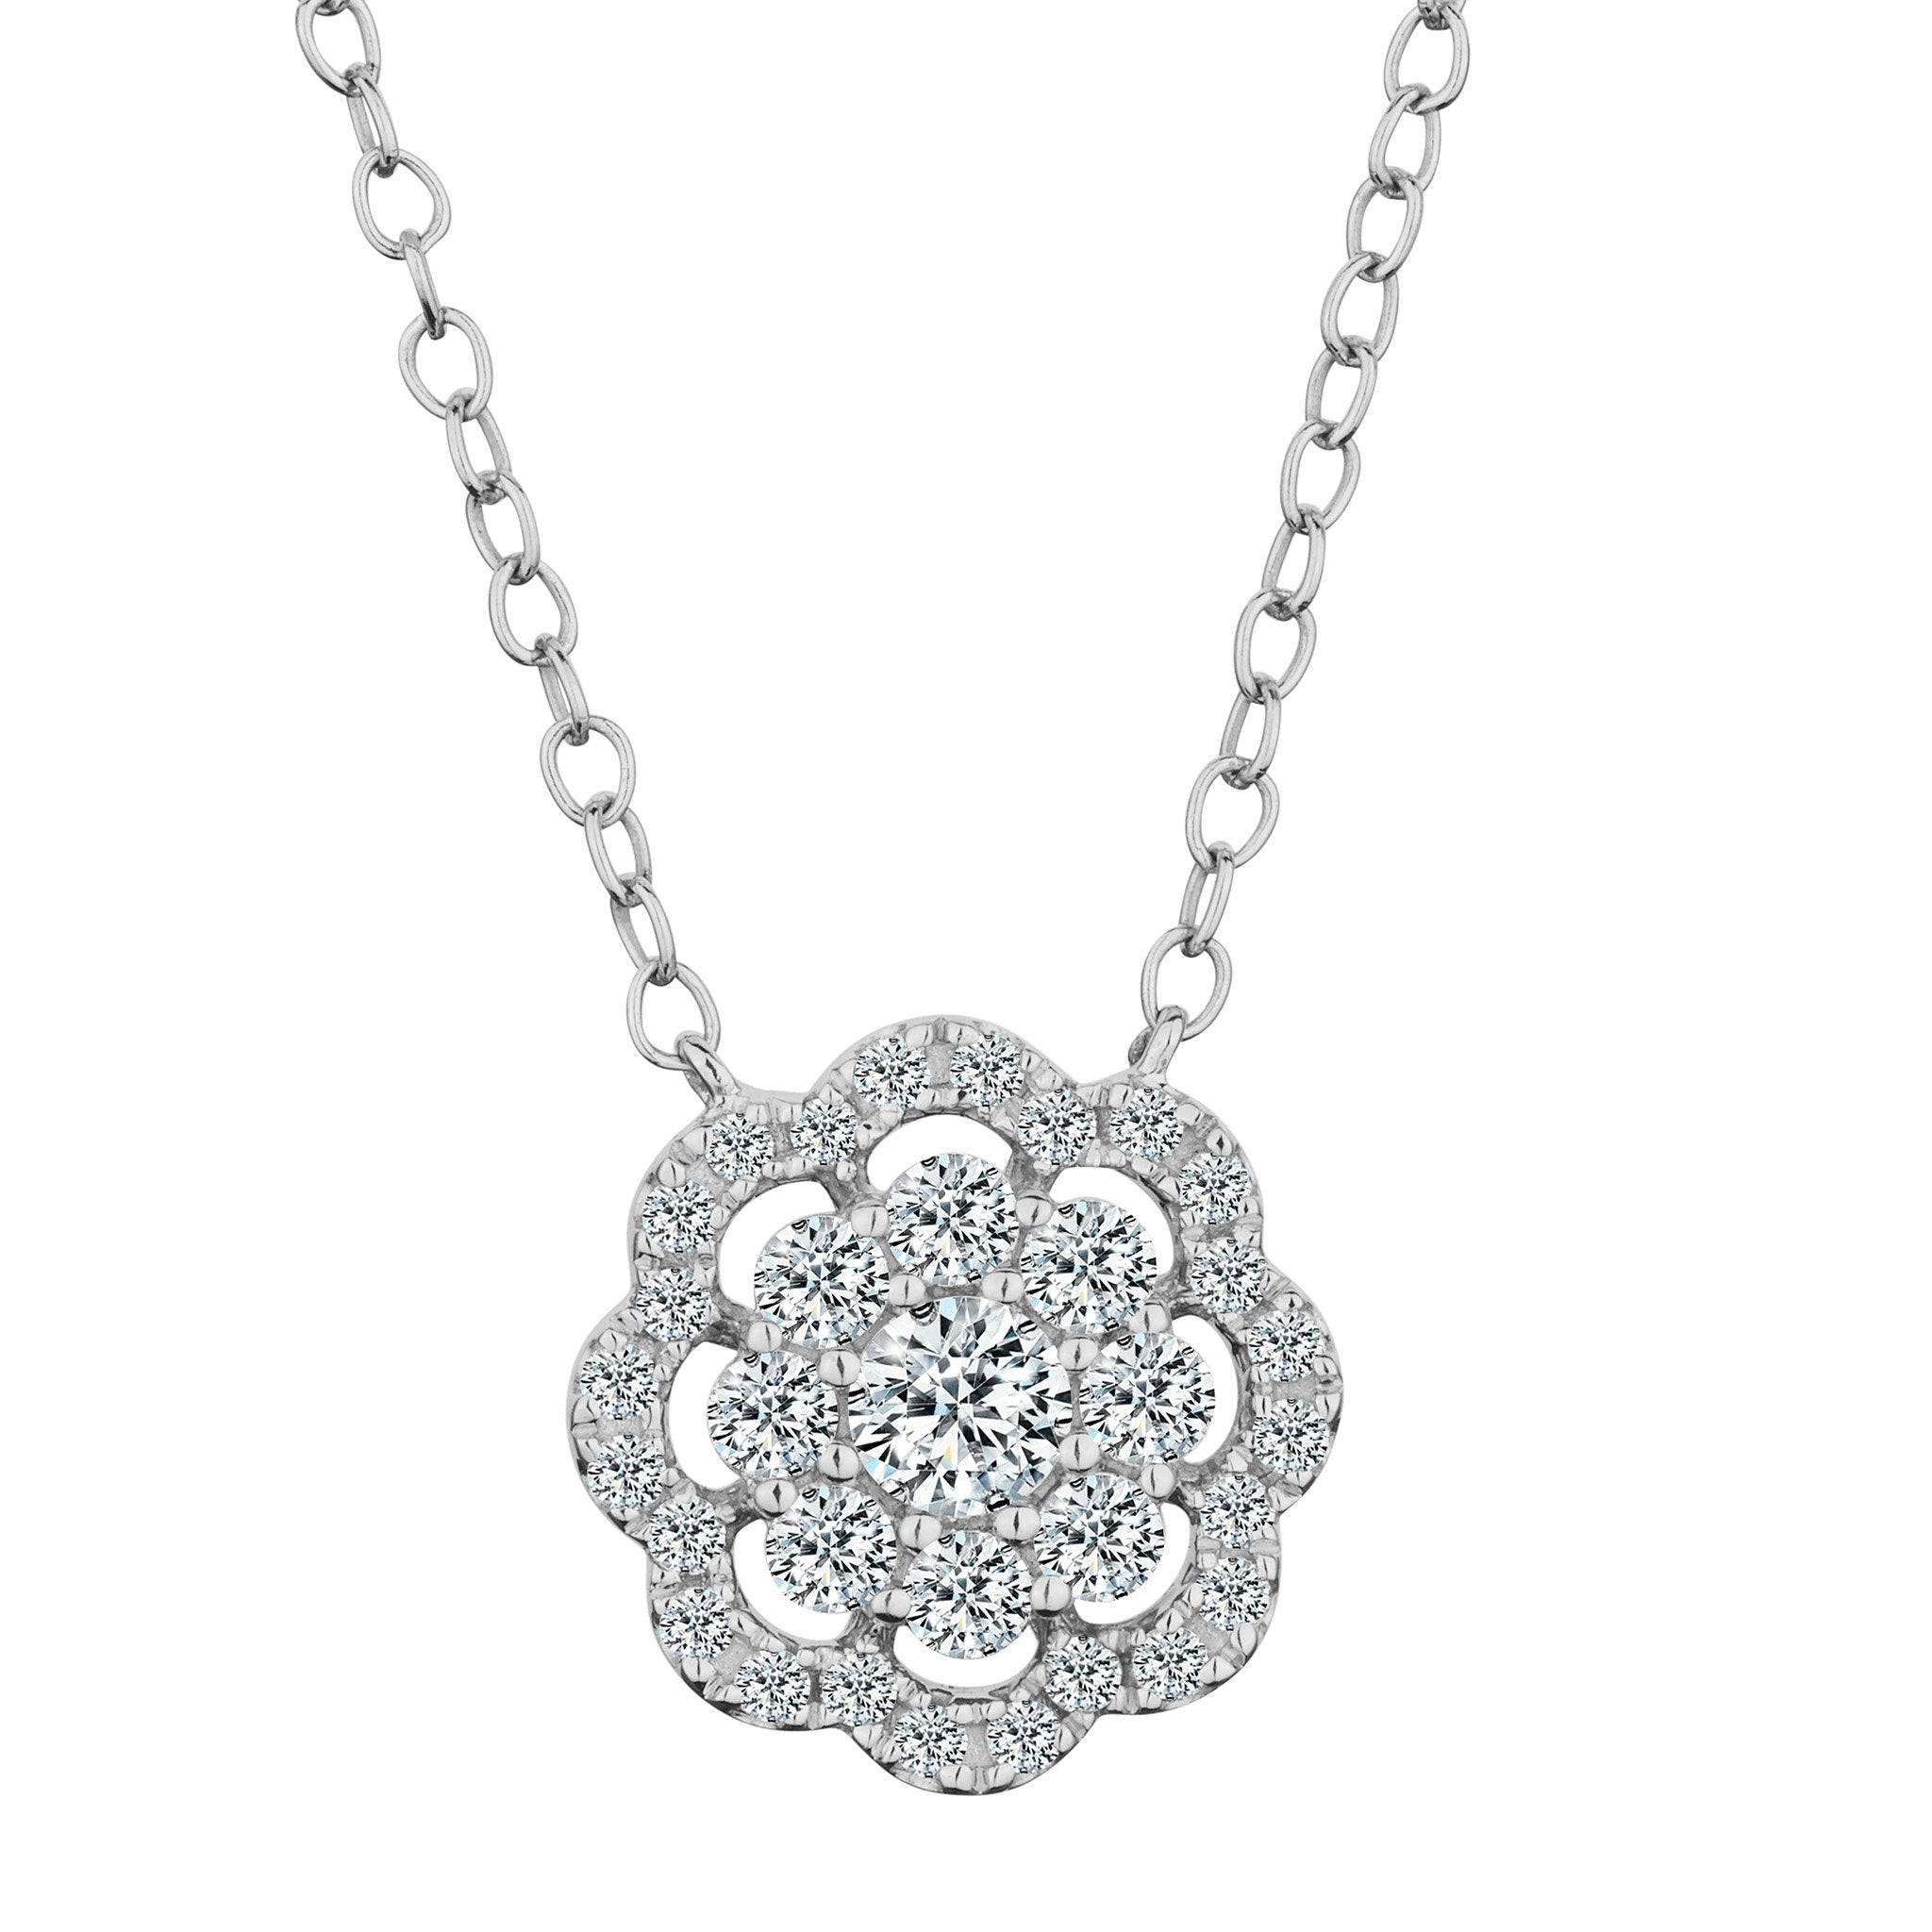 .40 Carat Diamond Pave Flower Pendant,  10kt White Gold. Necklaces and Pendants. Griffin Jewellery Designs. 